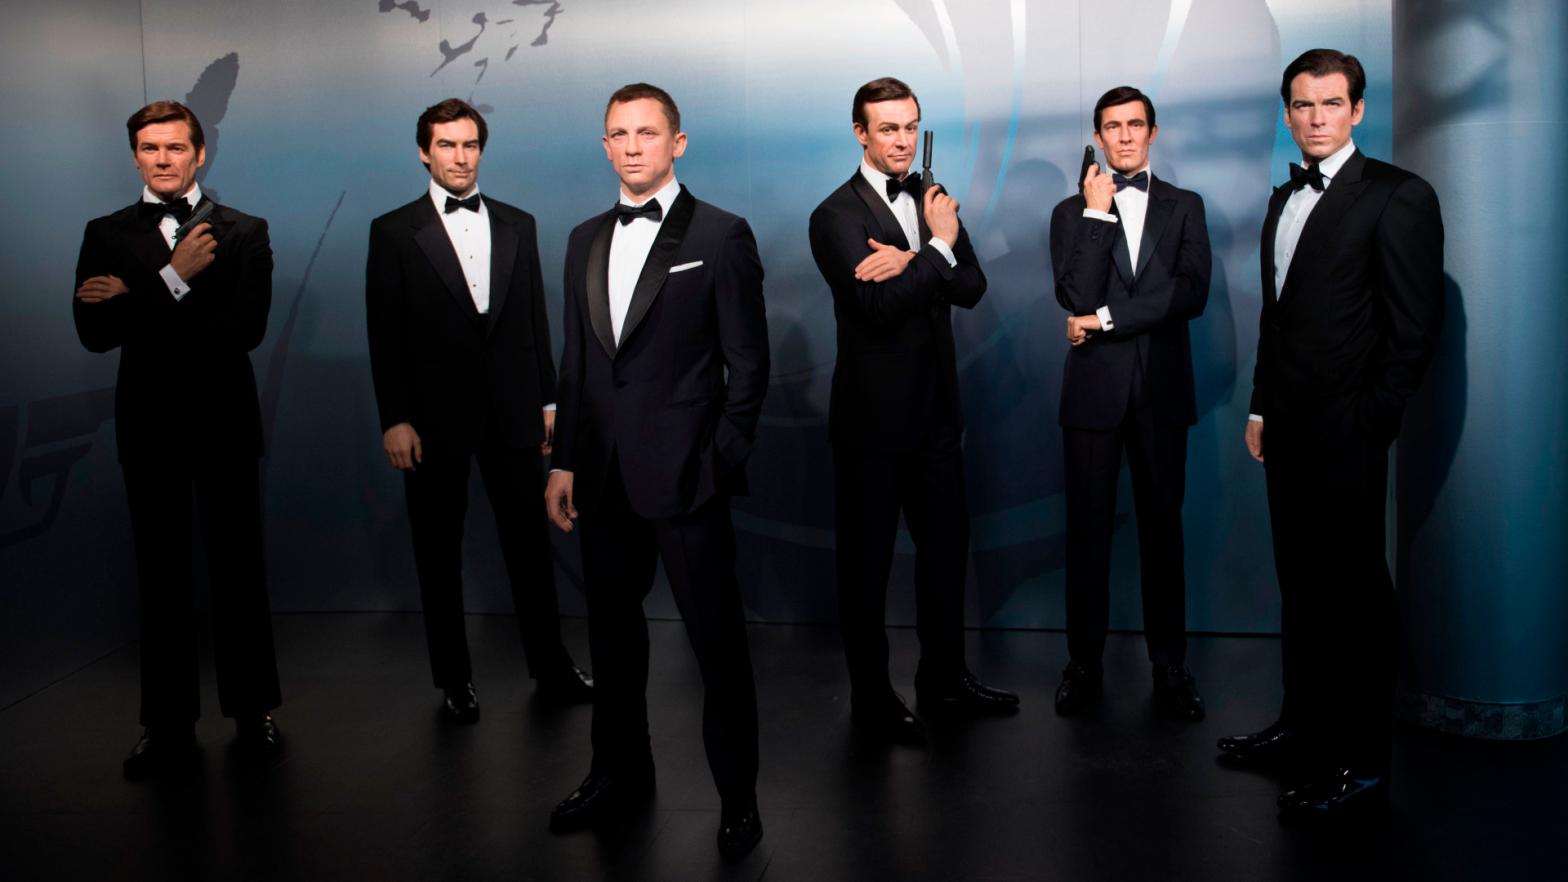 Wax figures of James Bond actors at Madame Tussauds. (Photo: Steffi Loos, Getty Images)